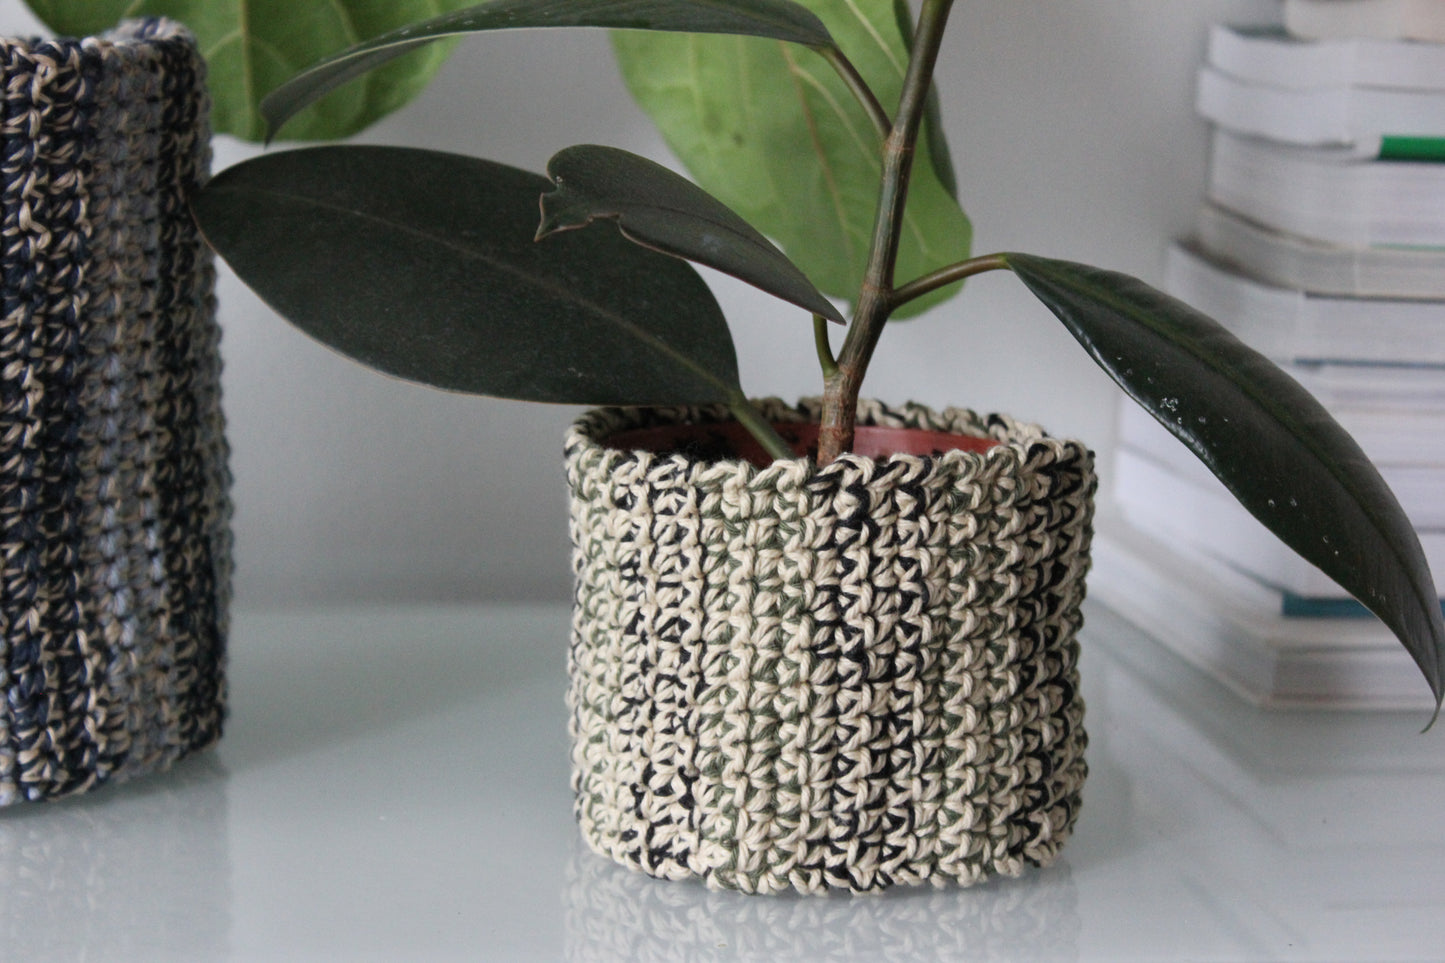 The Plant Pot Cover